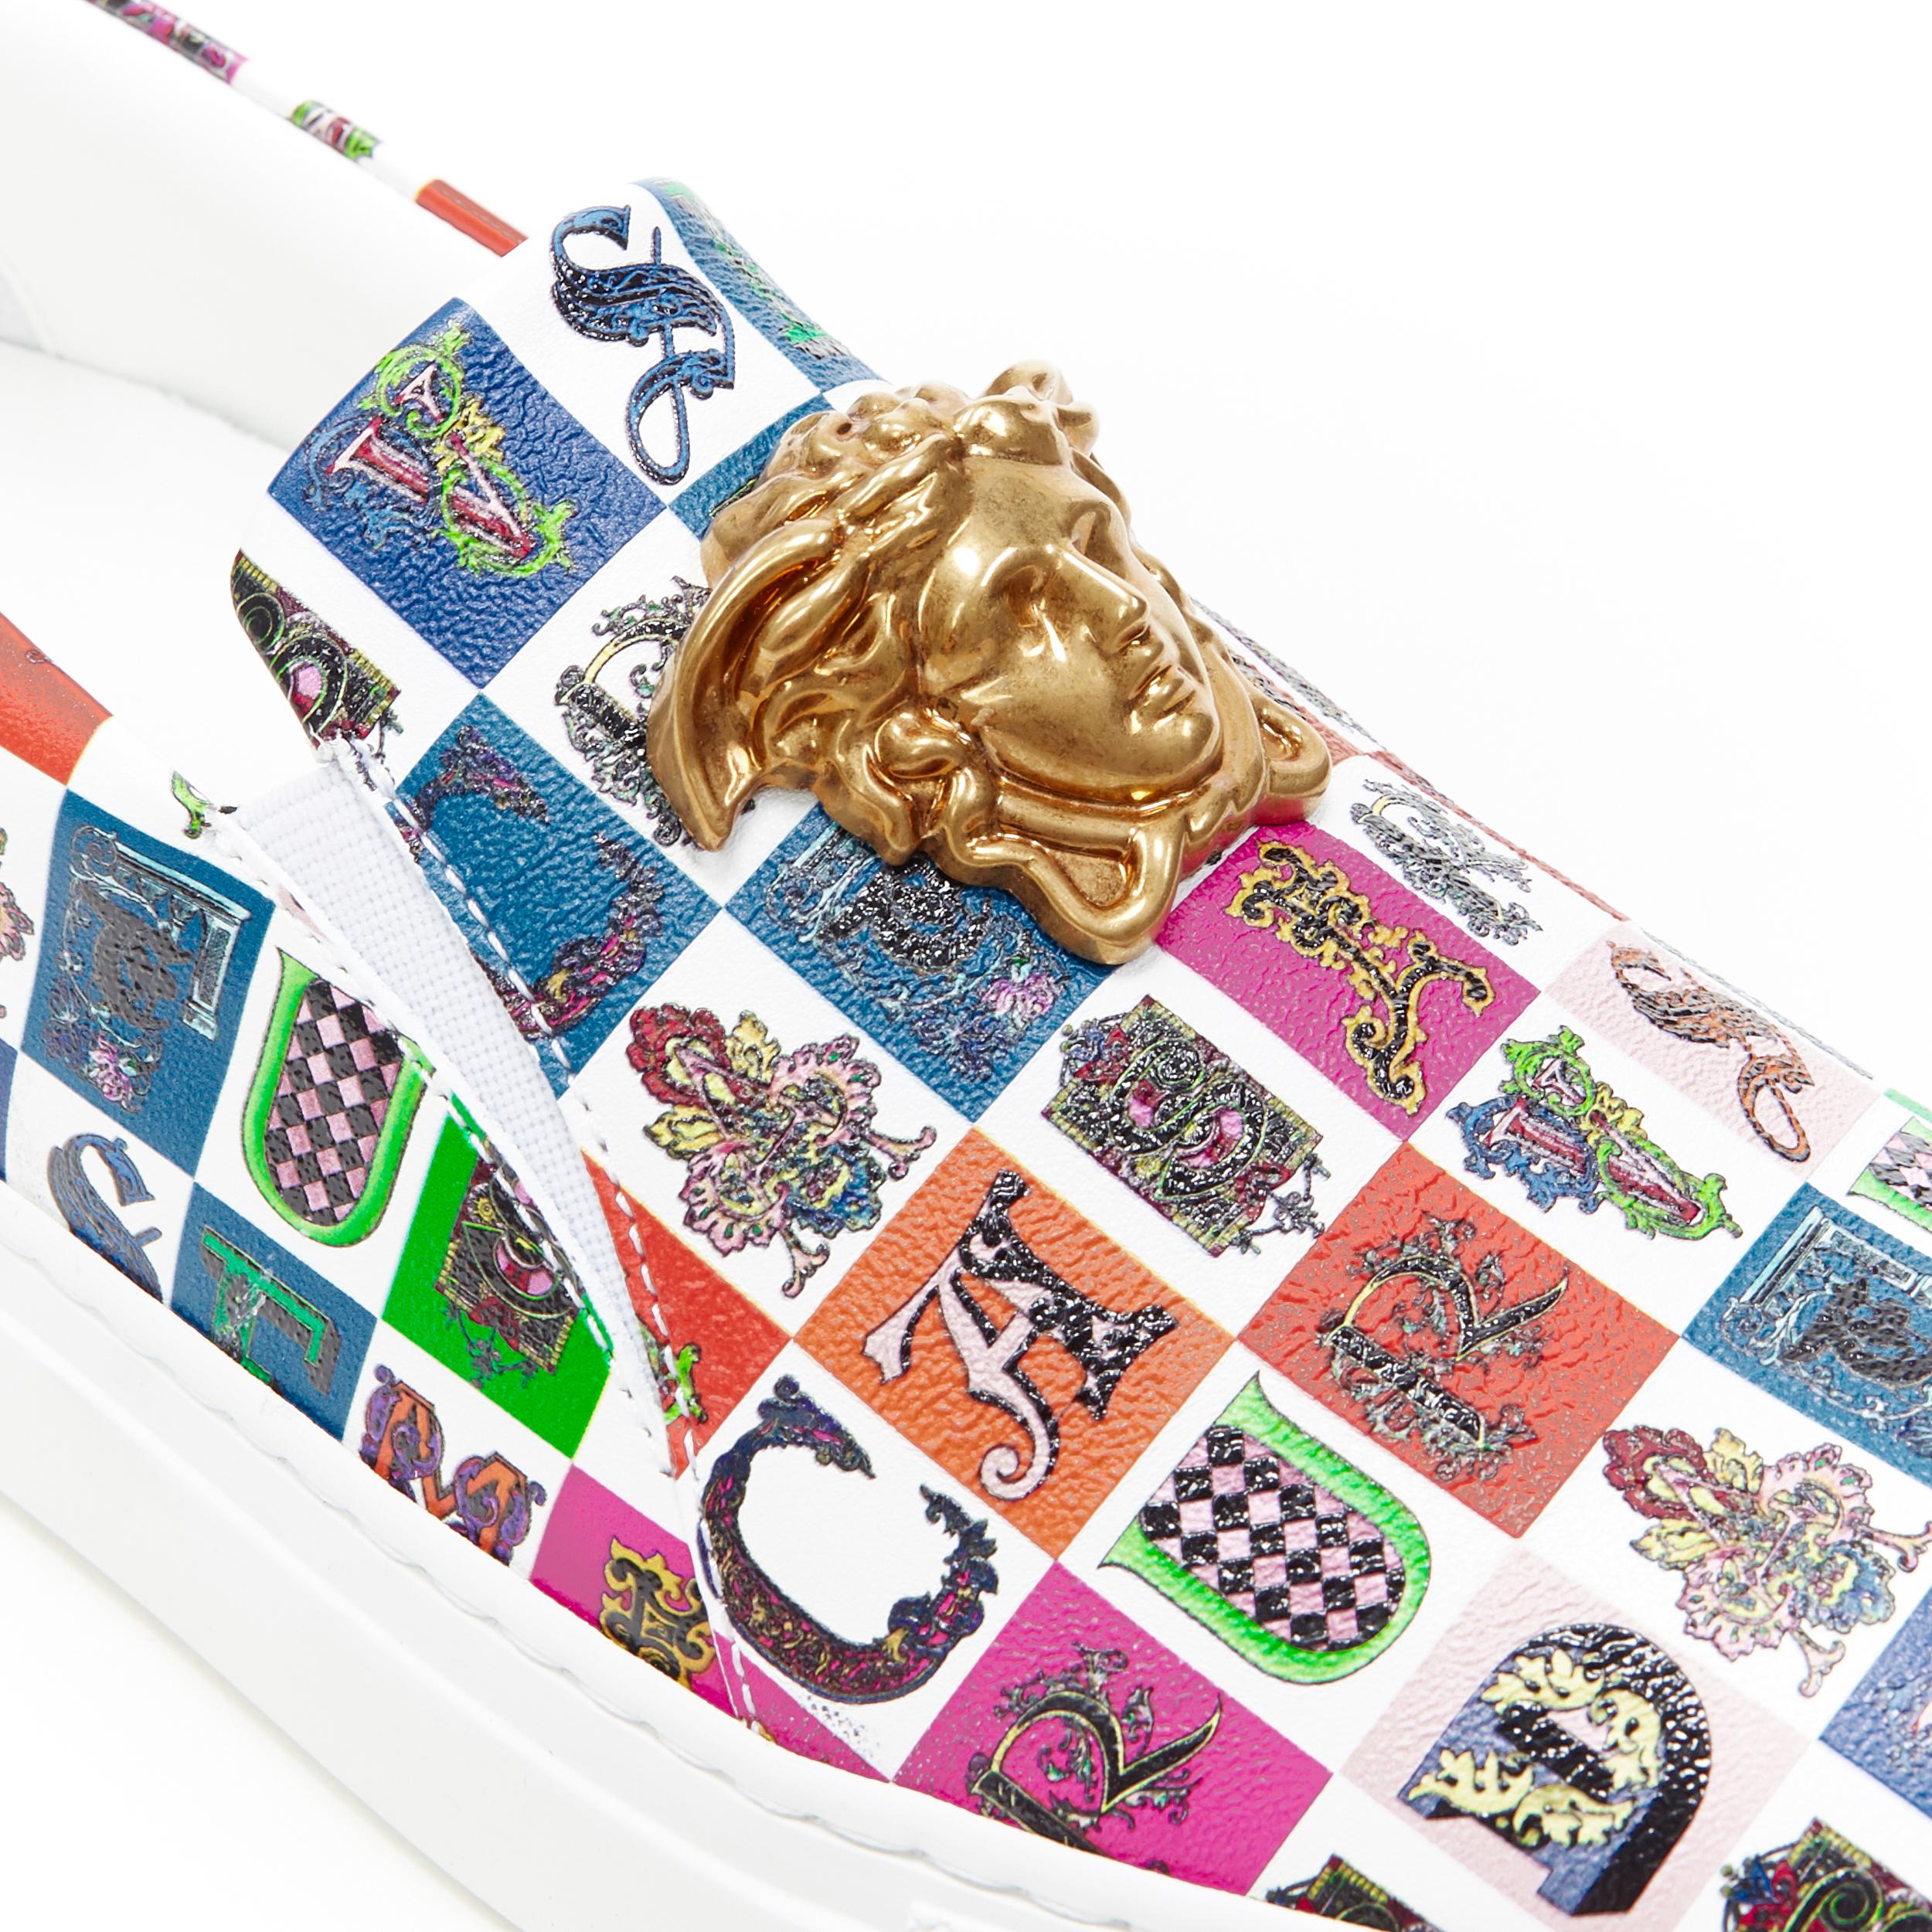 new VERSACE Palazzo Medusa baroque alphabet print gold face skate sneakers EU39
Brand: Versace
Designer: Donatella Versace
Collection: 2019
Model Name / Style: Palazzo Medusa
Material: Leather
Color: Multicolour
Pattern: Abstract
Closure: Slip